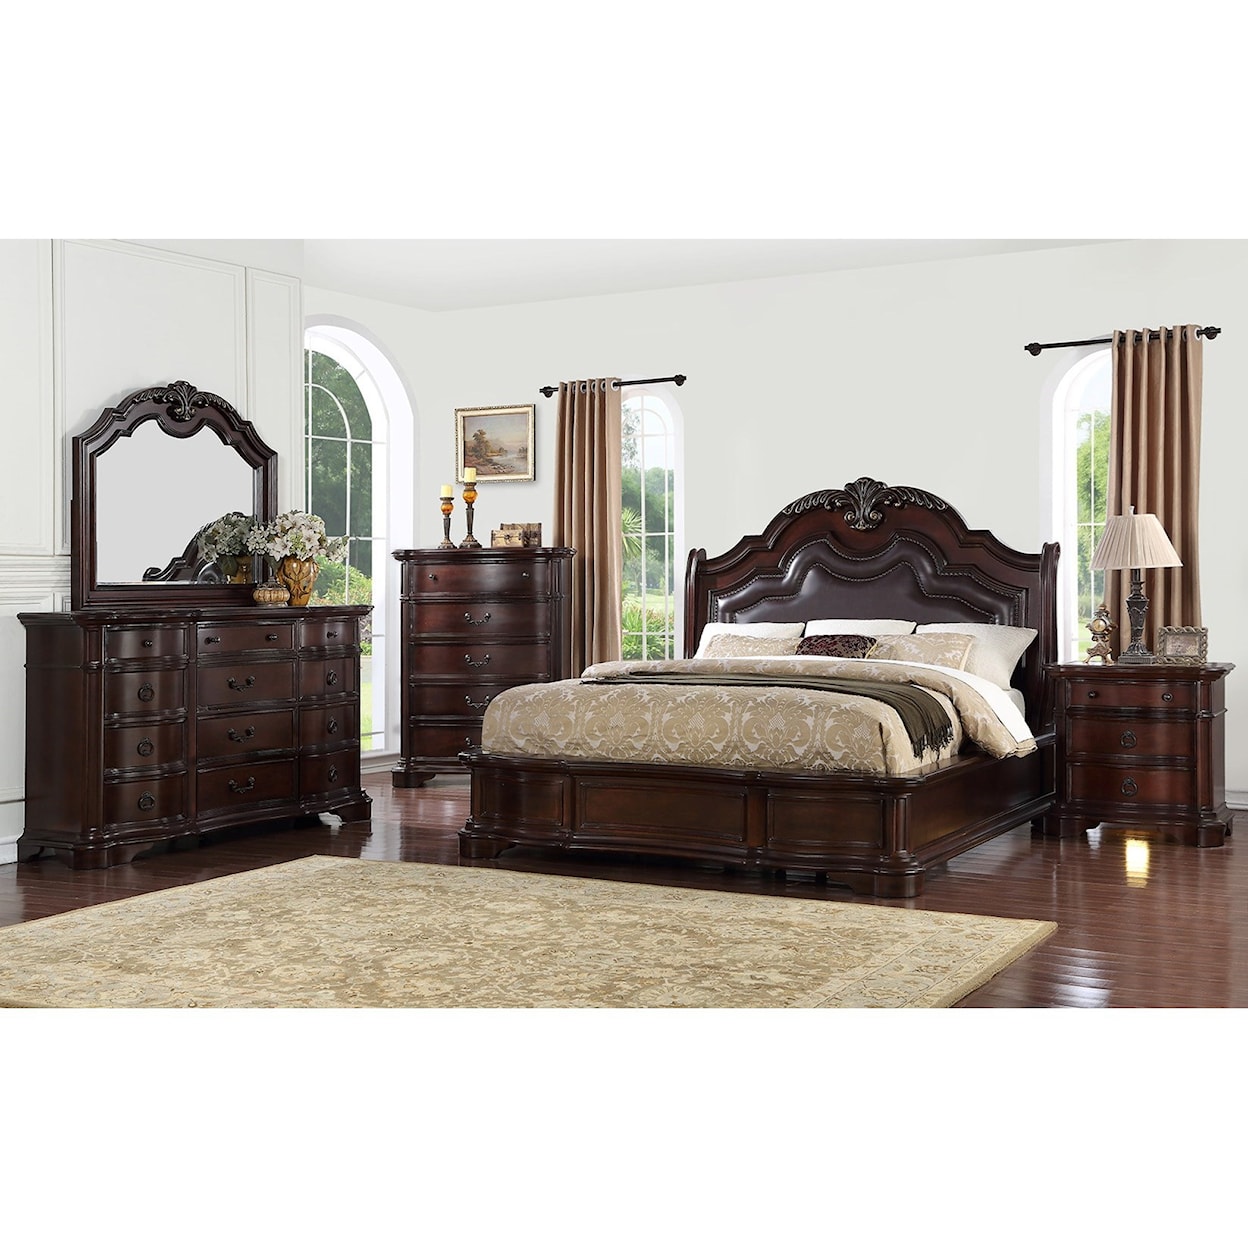 Avalon Furniture St Louis Queen Bedroom Group